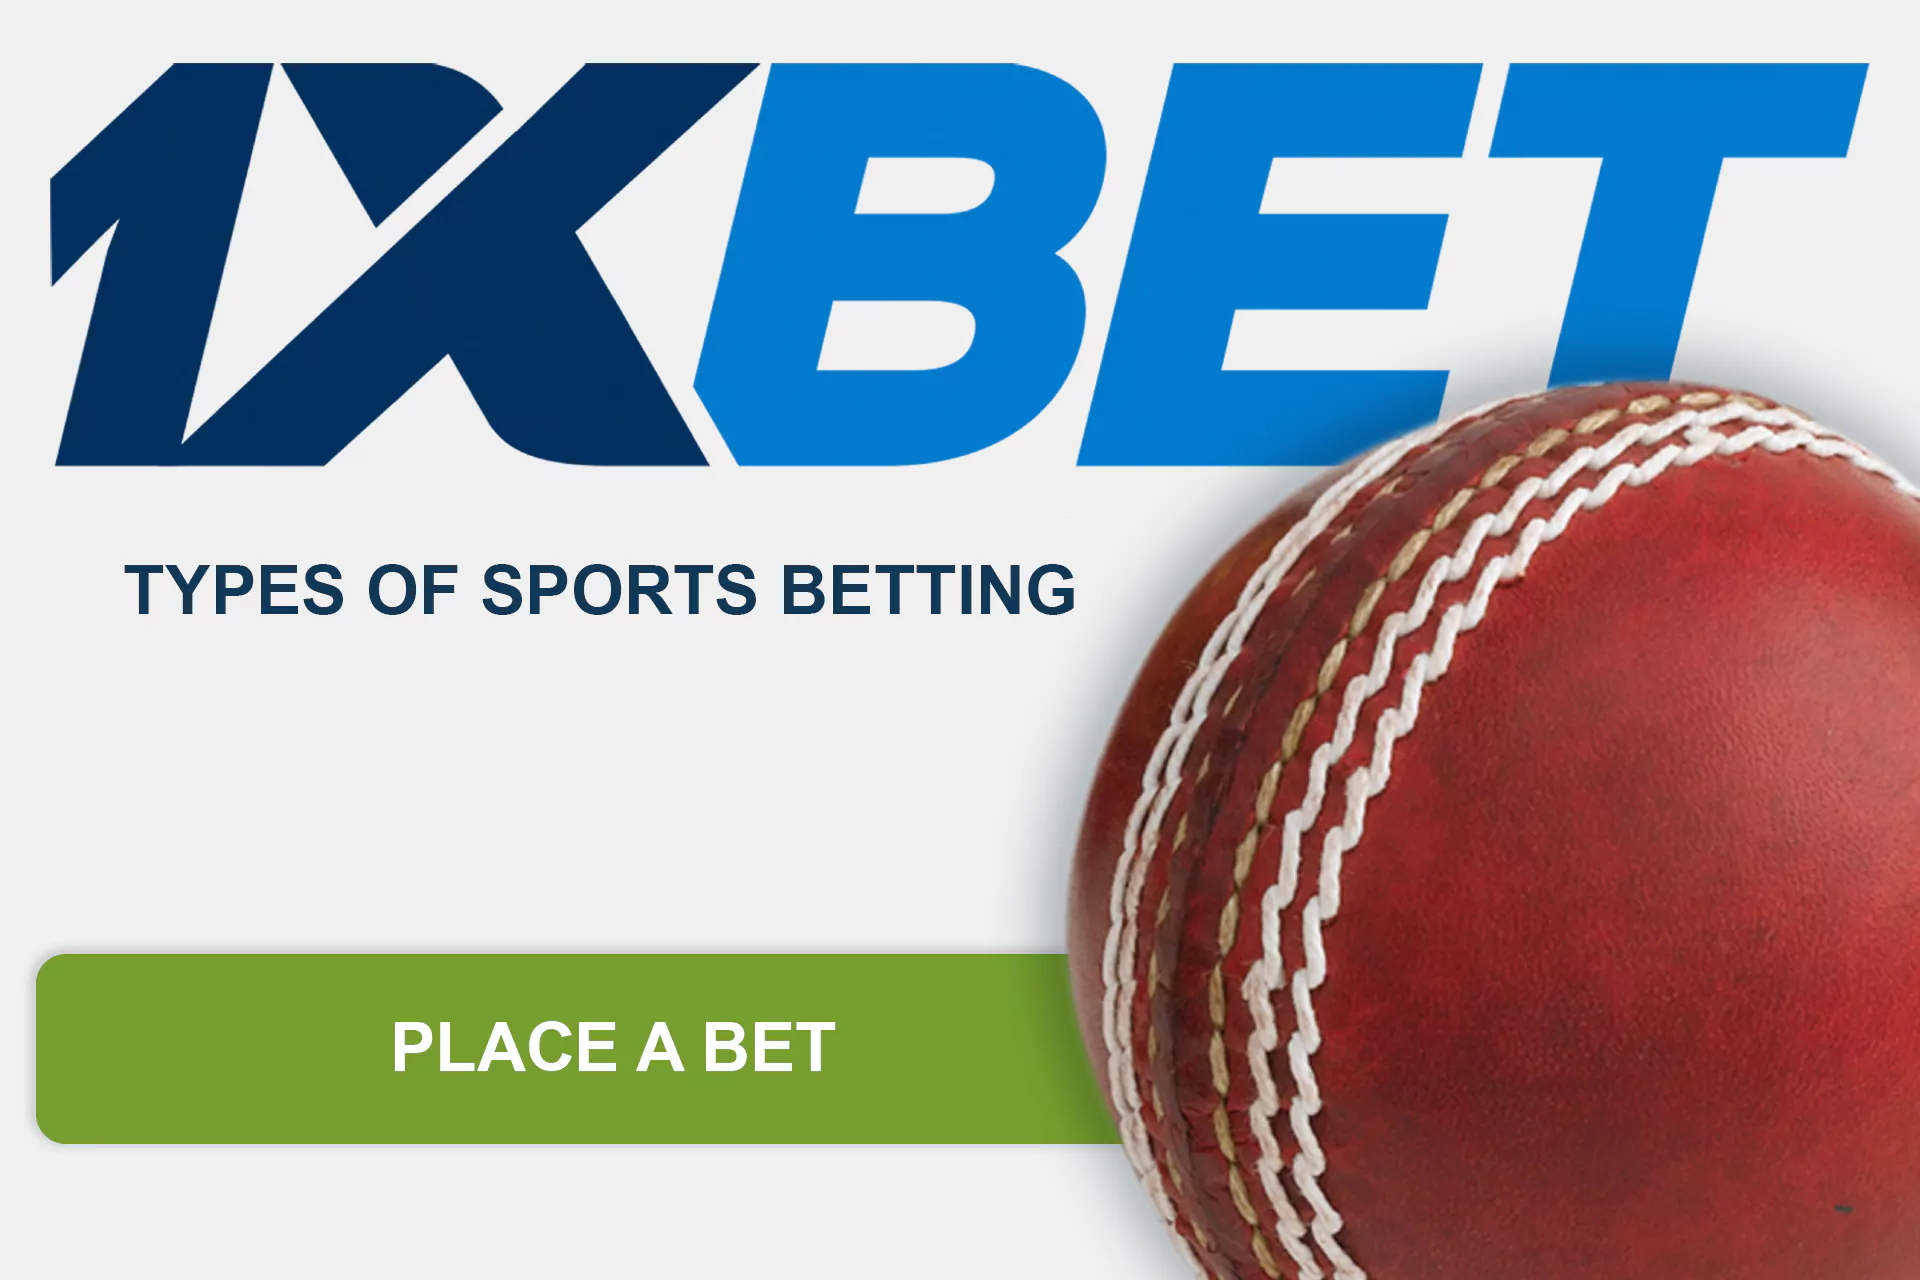 At 1xBet, you can bet on cricket, football, hockey and events of many other popular sports disciplines.